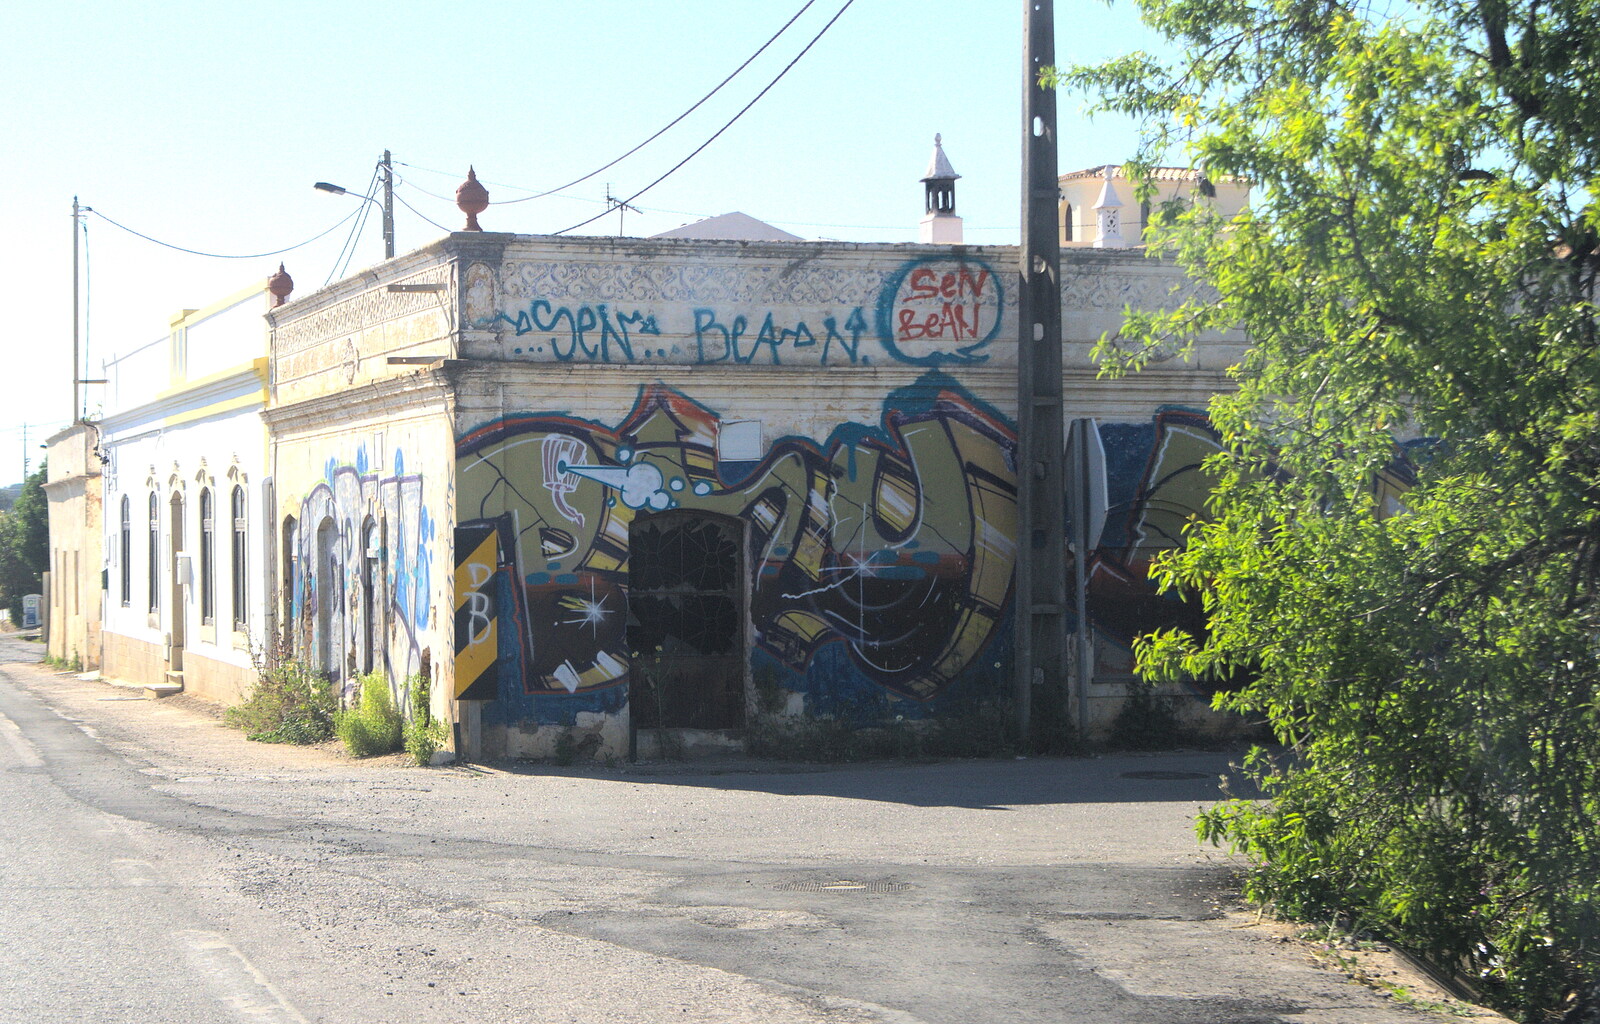 A heavily-graffiti'd building from Gary and Vanessa's Barbeque, Alcantarilha, Algarve, Portugal - 7th April 2016